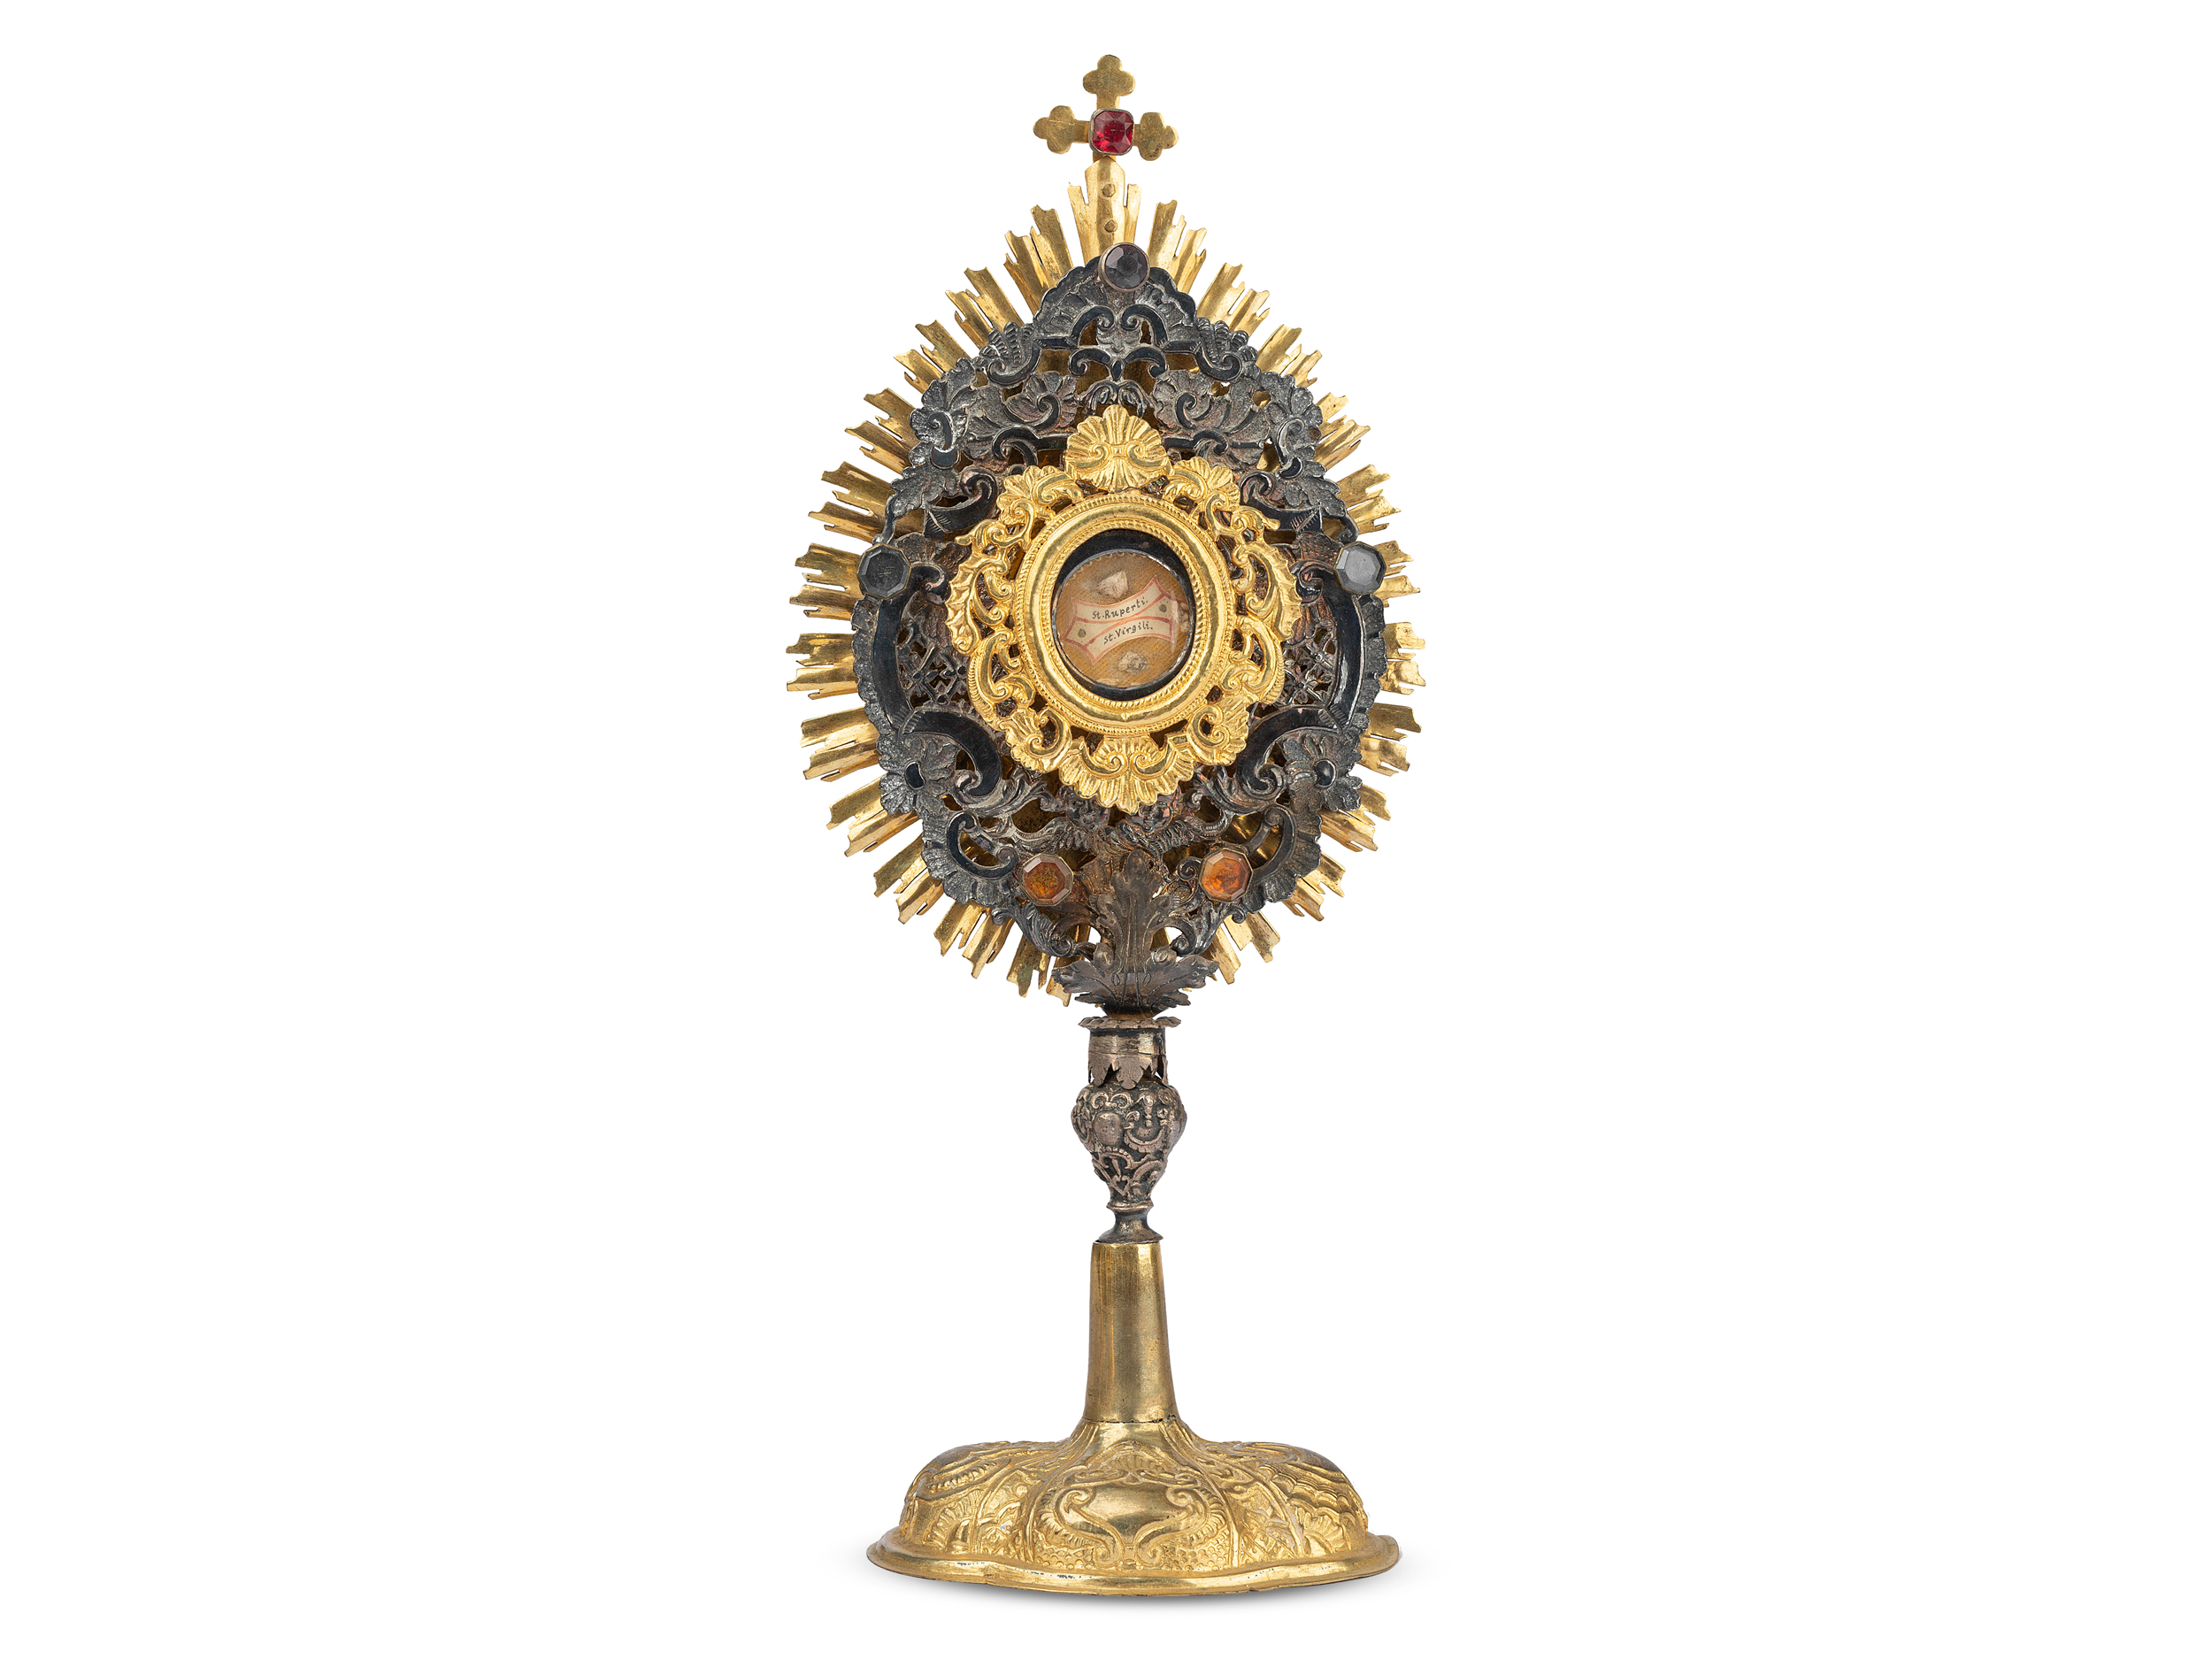 Reliquary monstrance, St. Rupert and St. Virgil, Brass gold-plated, with silver applications